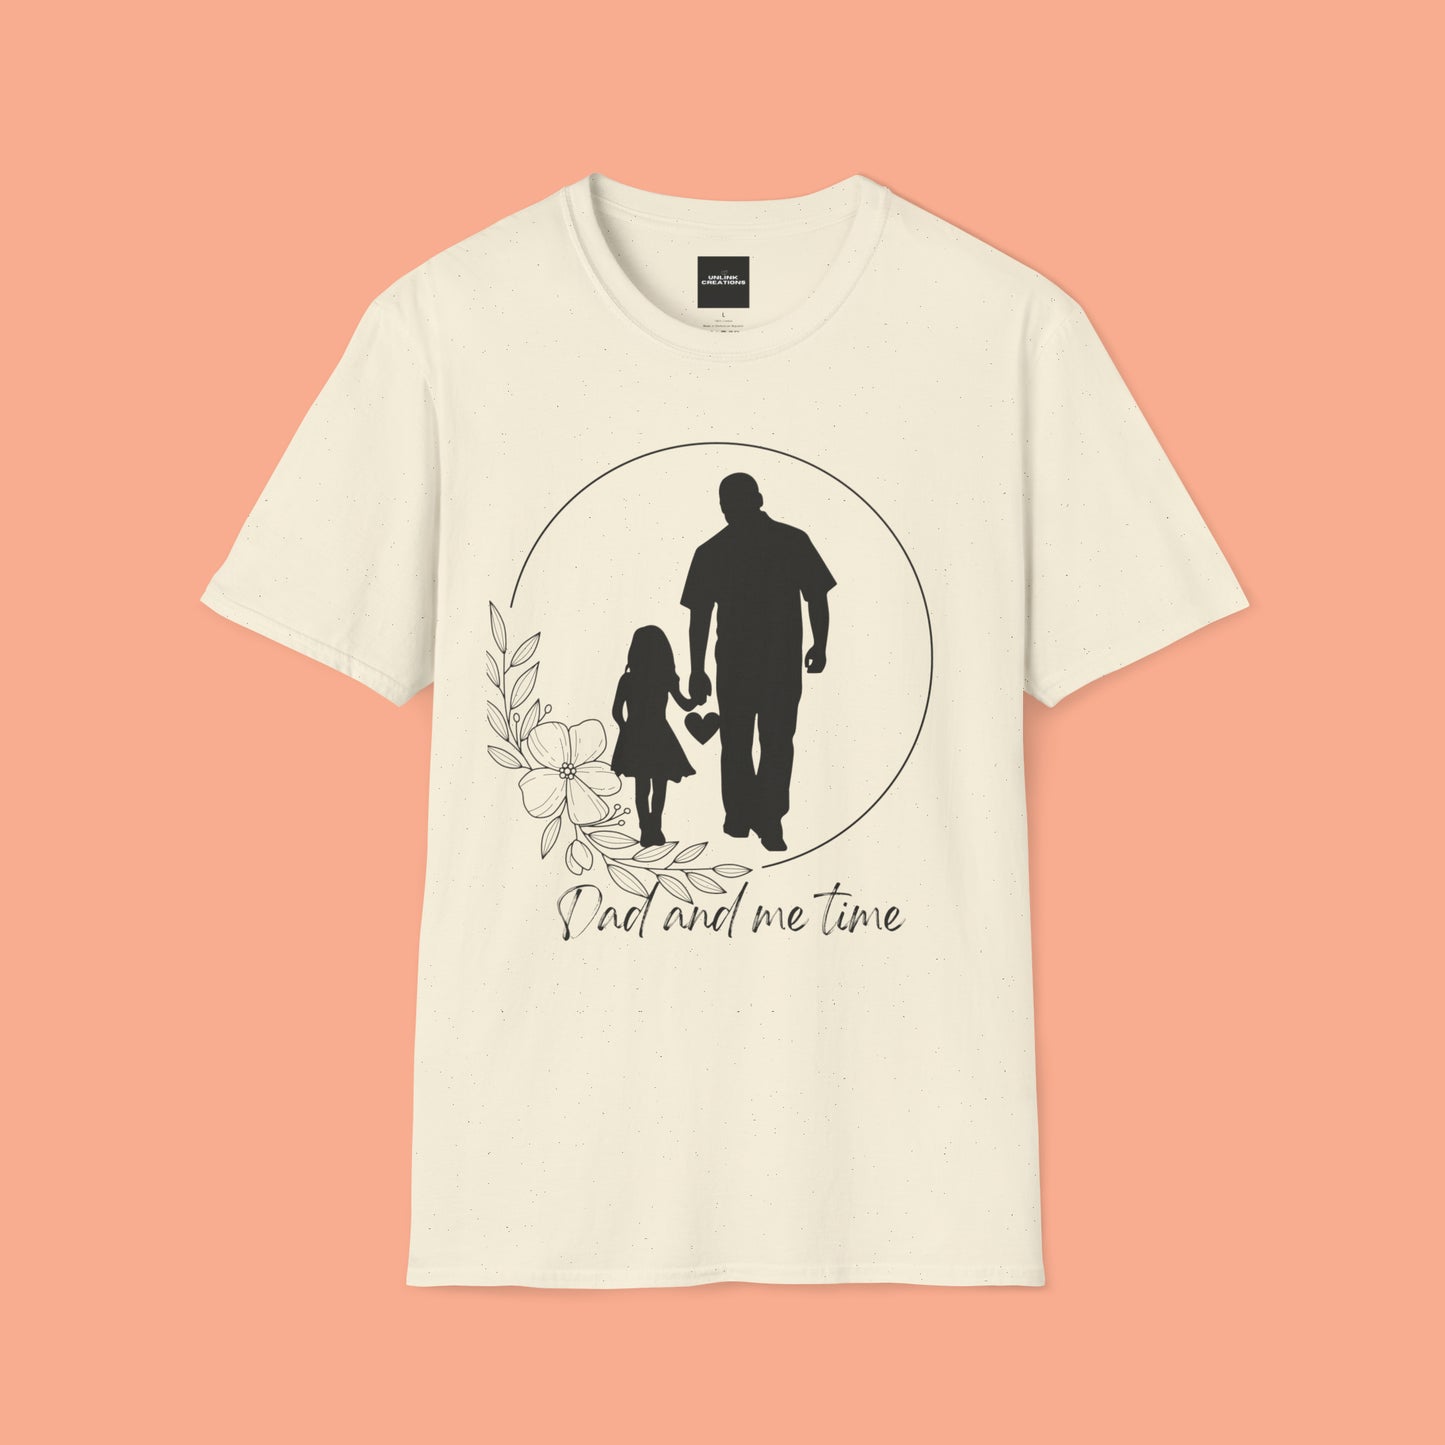 Sweet “Dad and me time” on this Unisex Softstyle T-Shirt. Celebrate Dads taking time to be Dads!